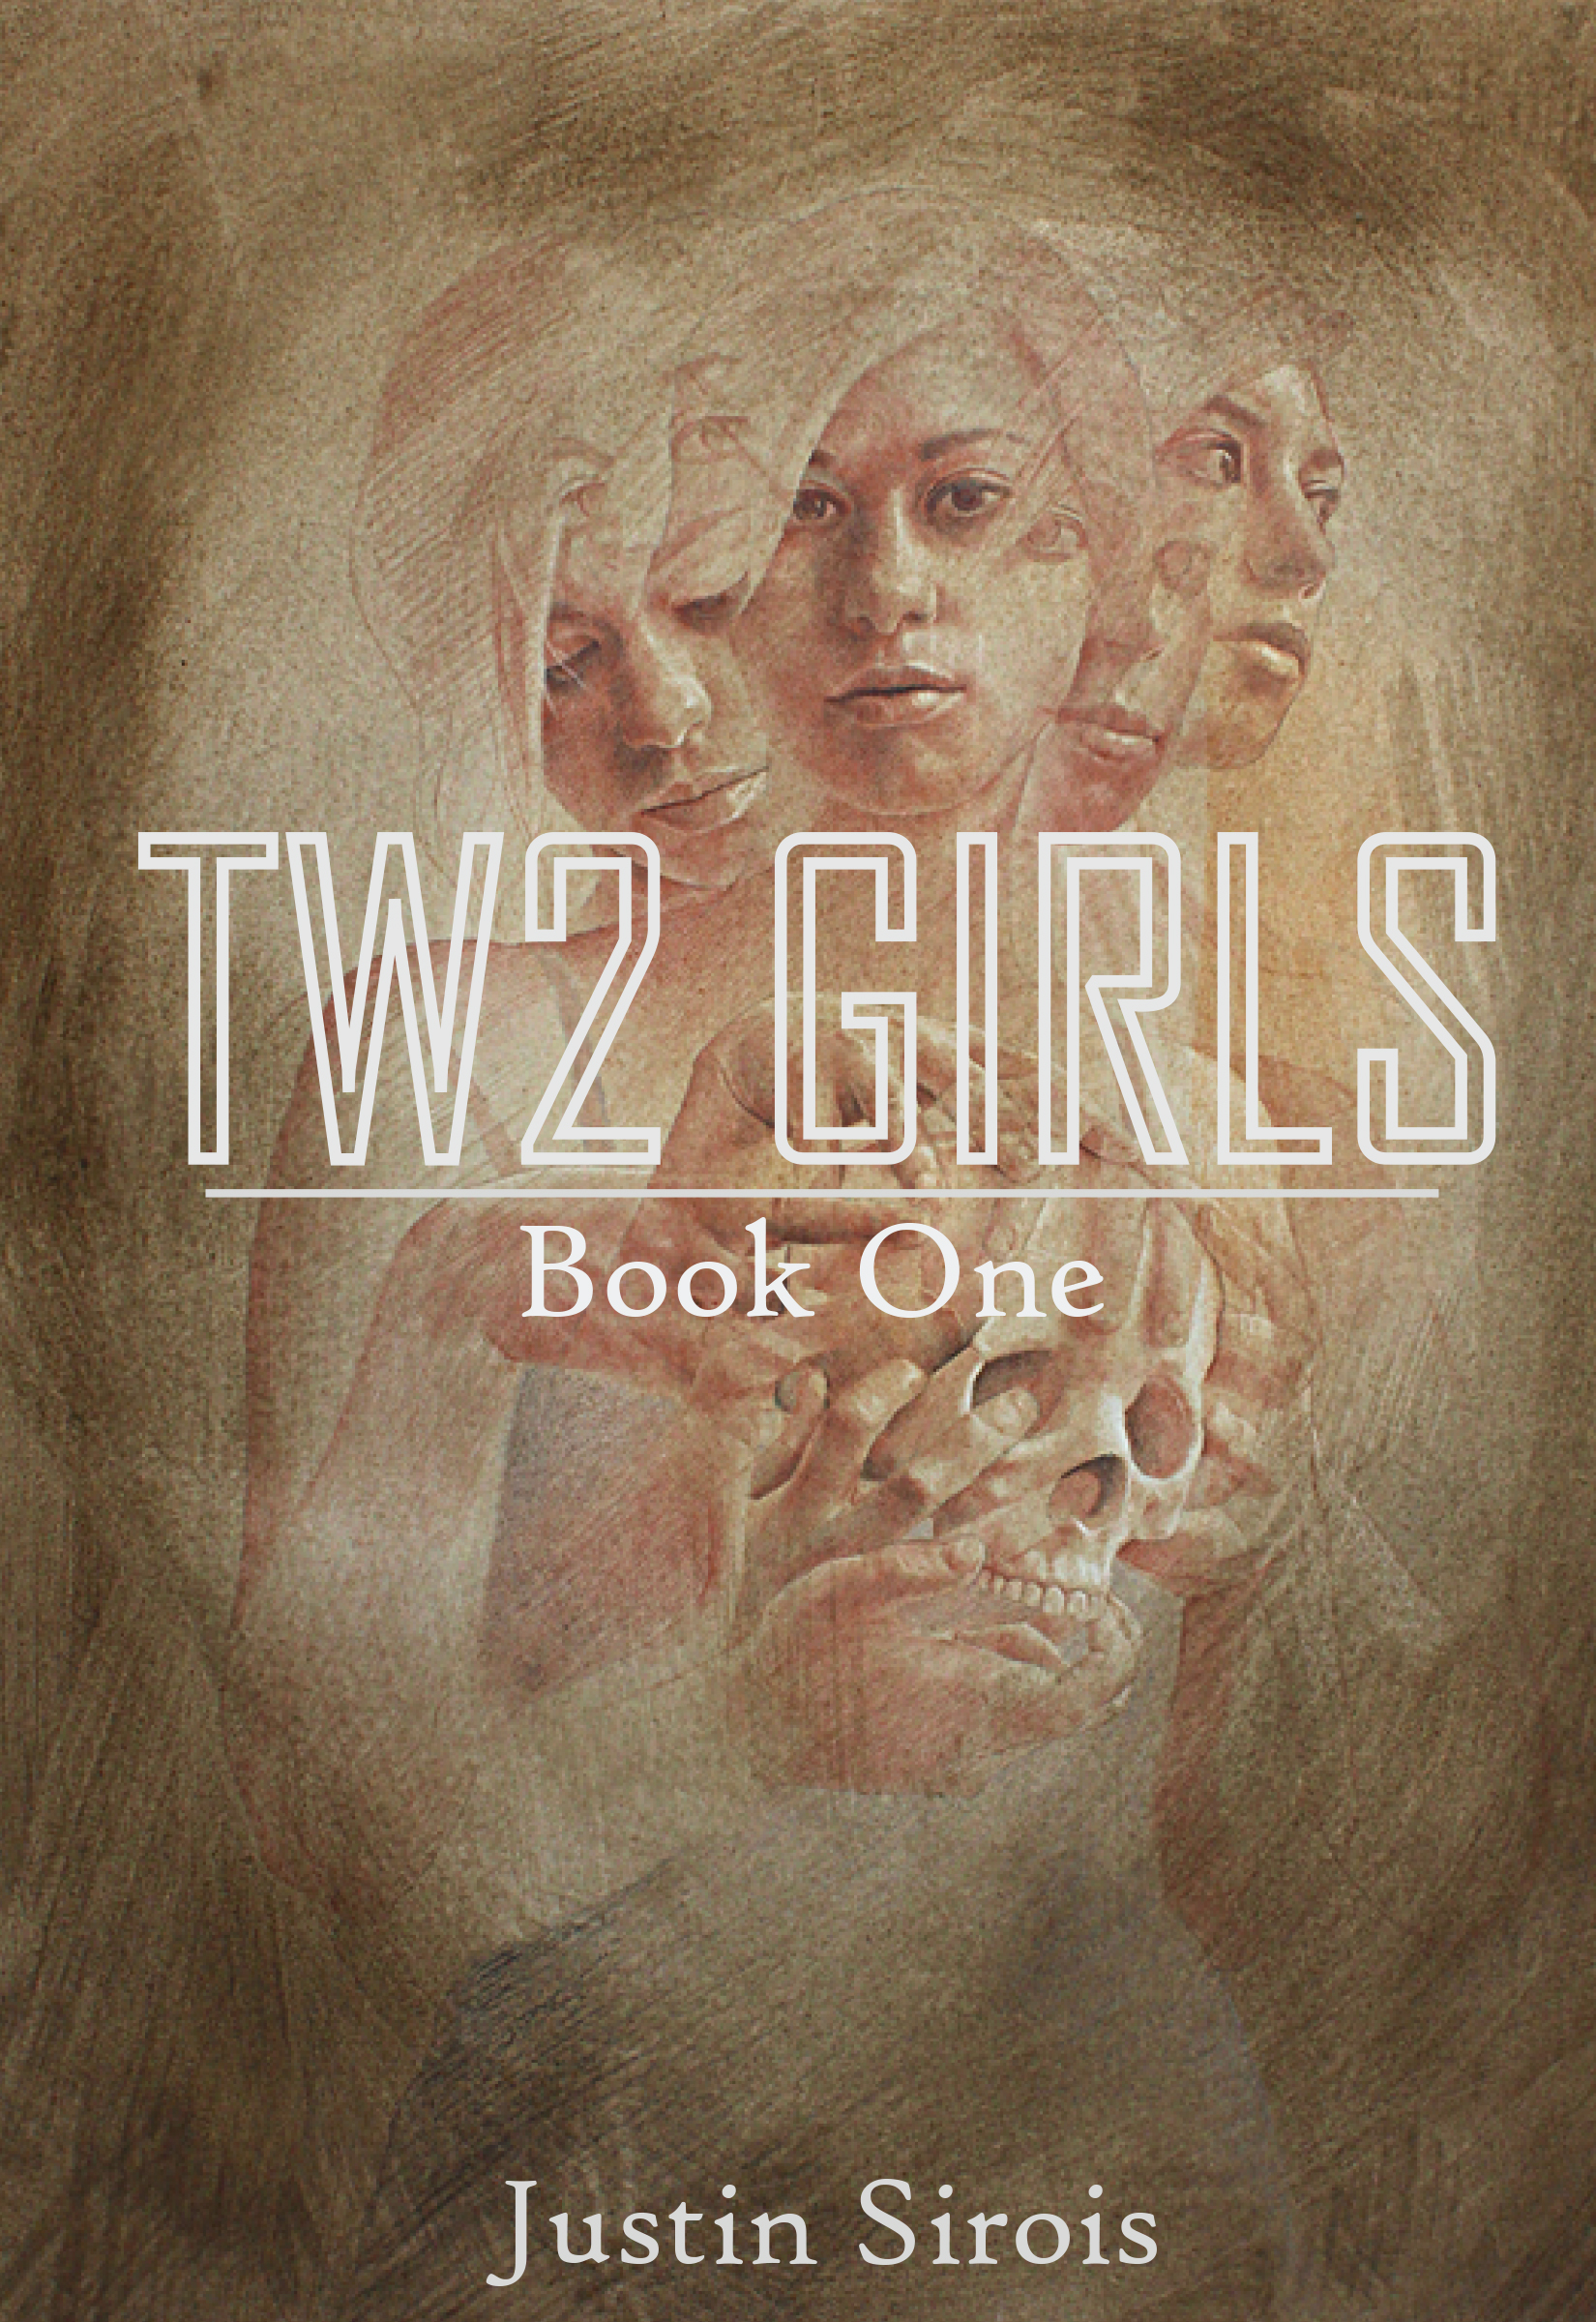 Two Girls book cover. Forthcoming from Amazon's Kindle Press.